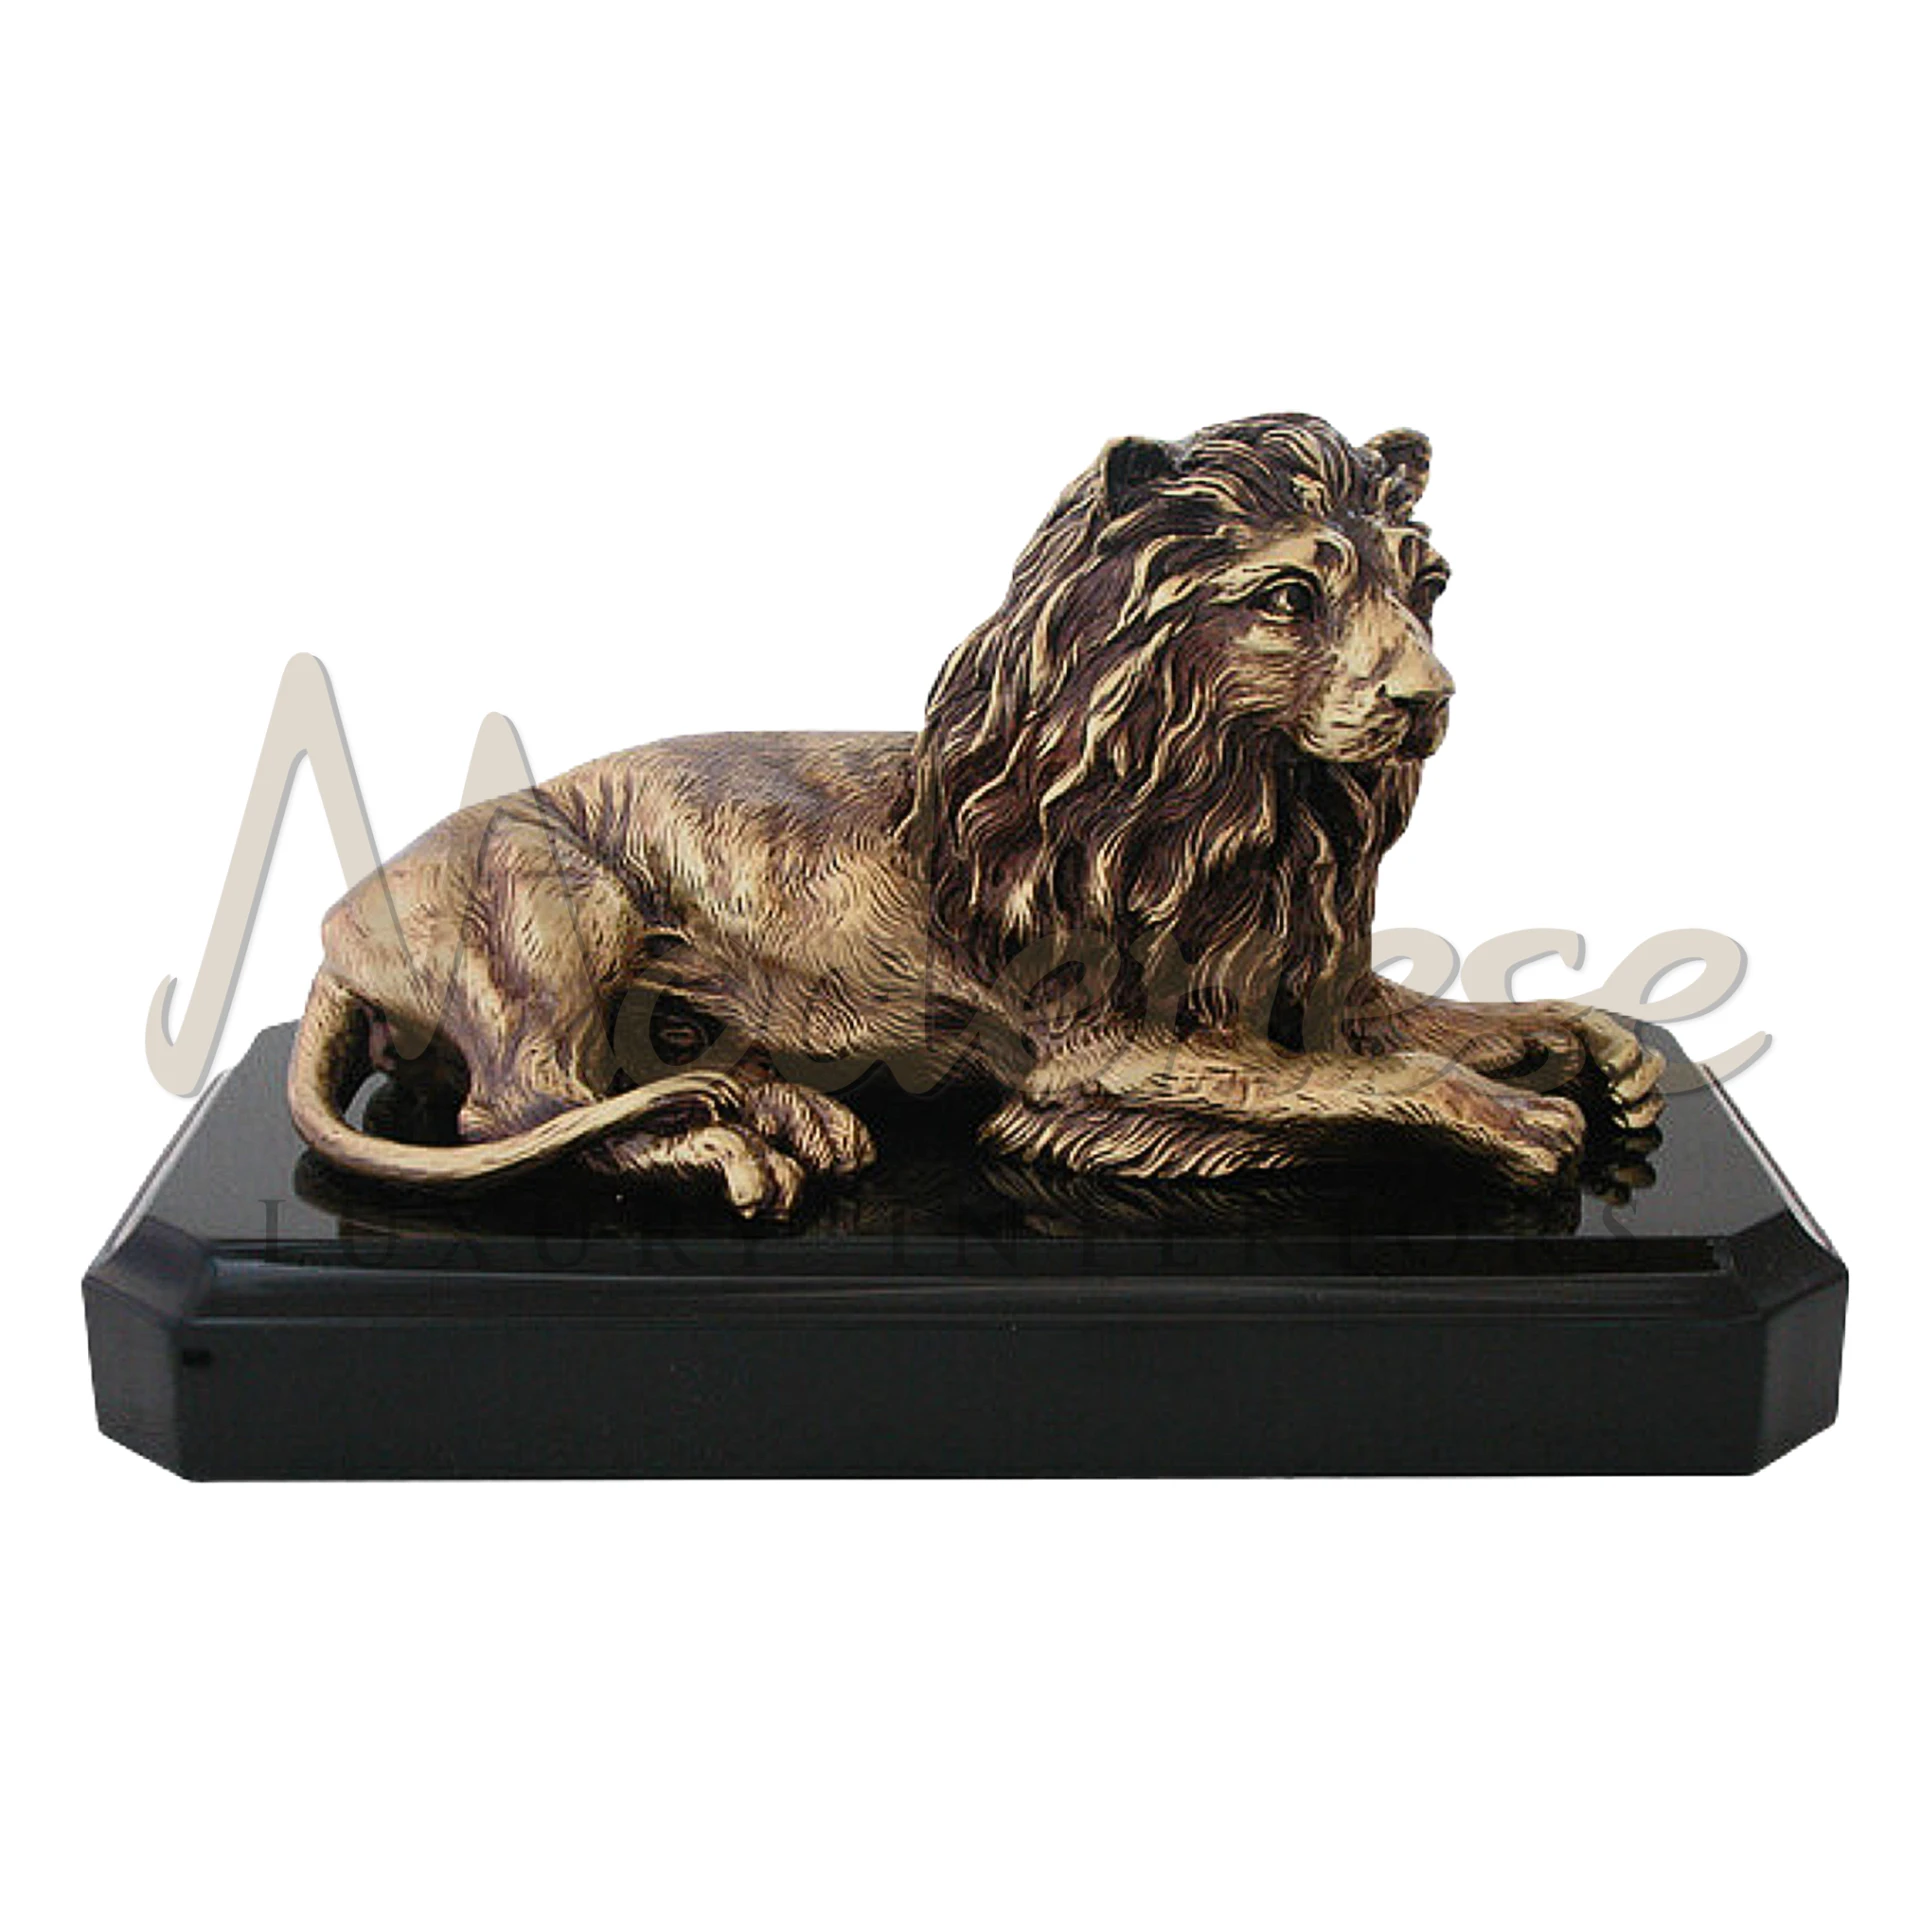 Classic Gold Lion Decor: Symbol of power and courage, ideal for luxury interior decor enthusiasts.